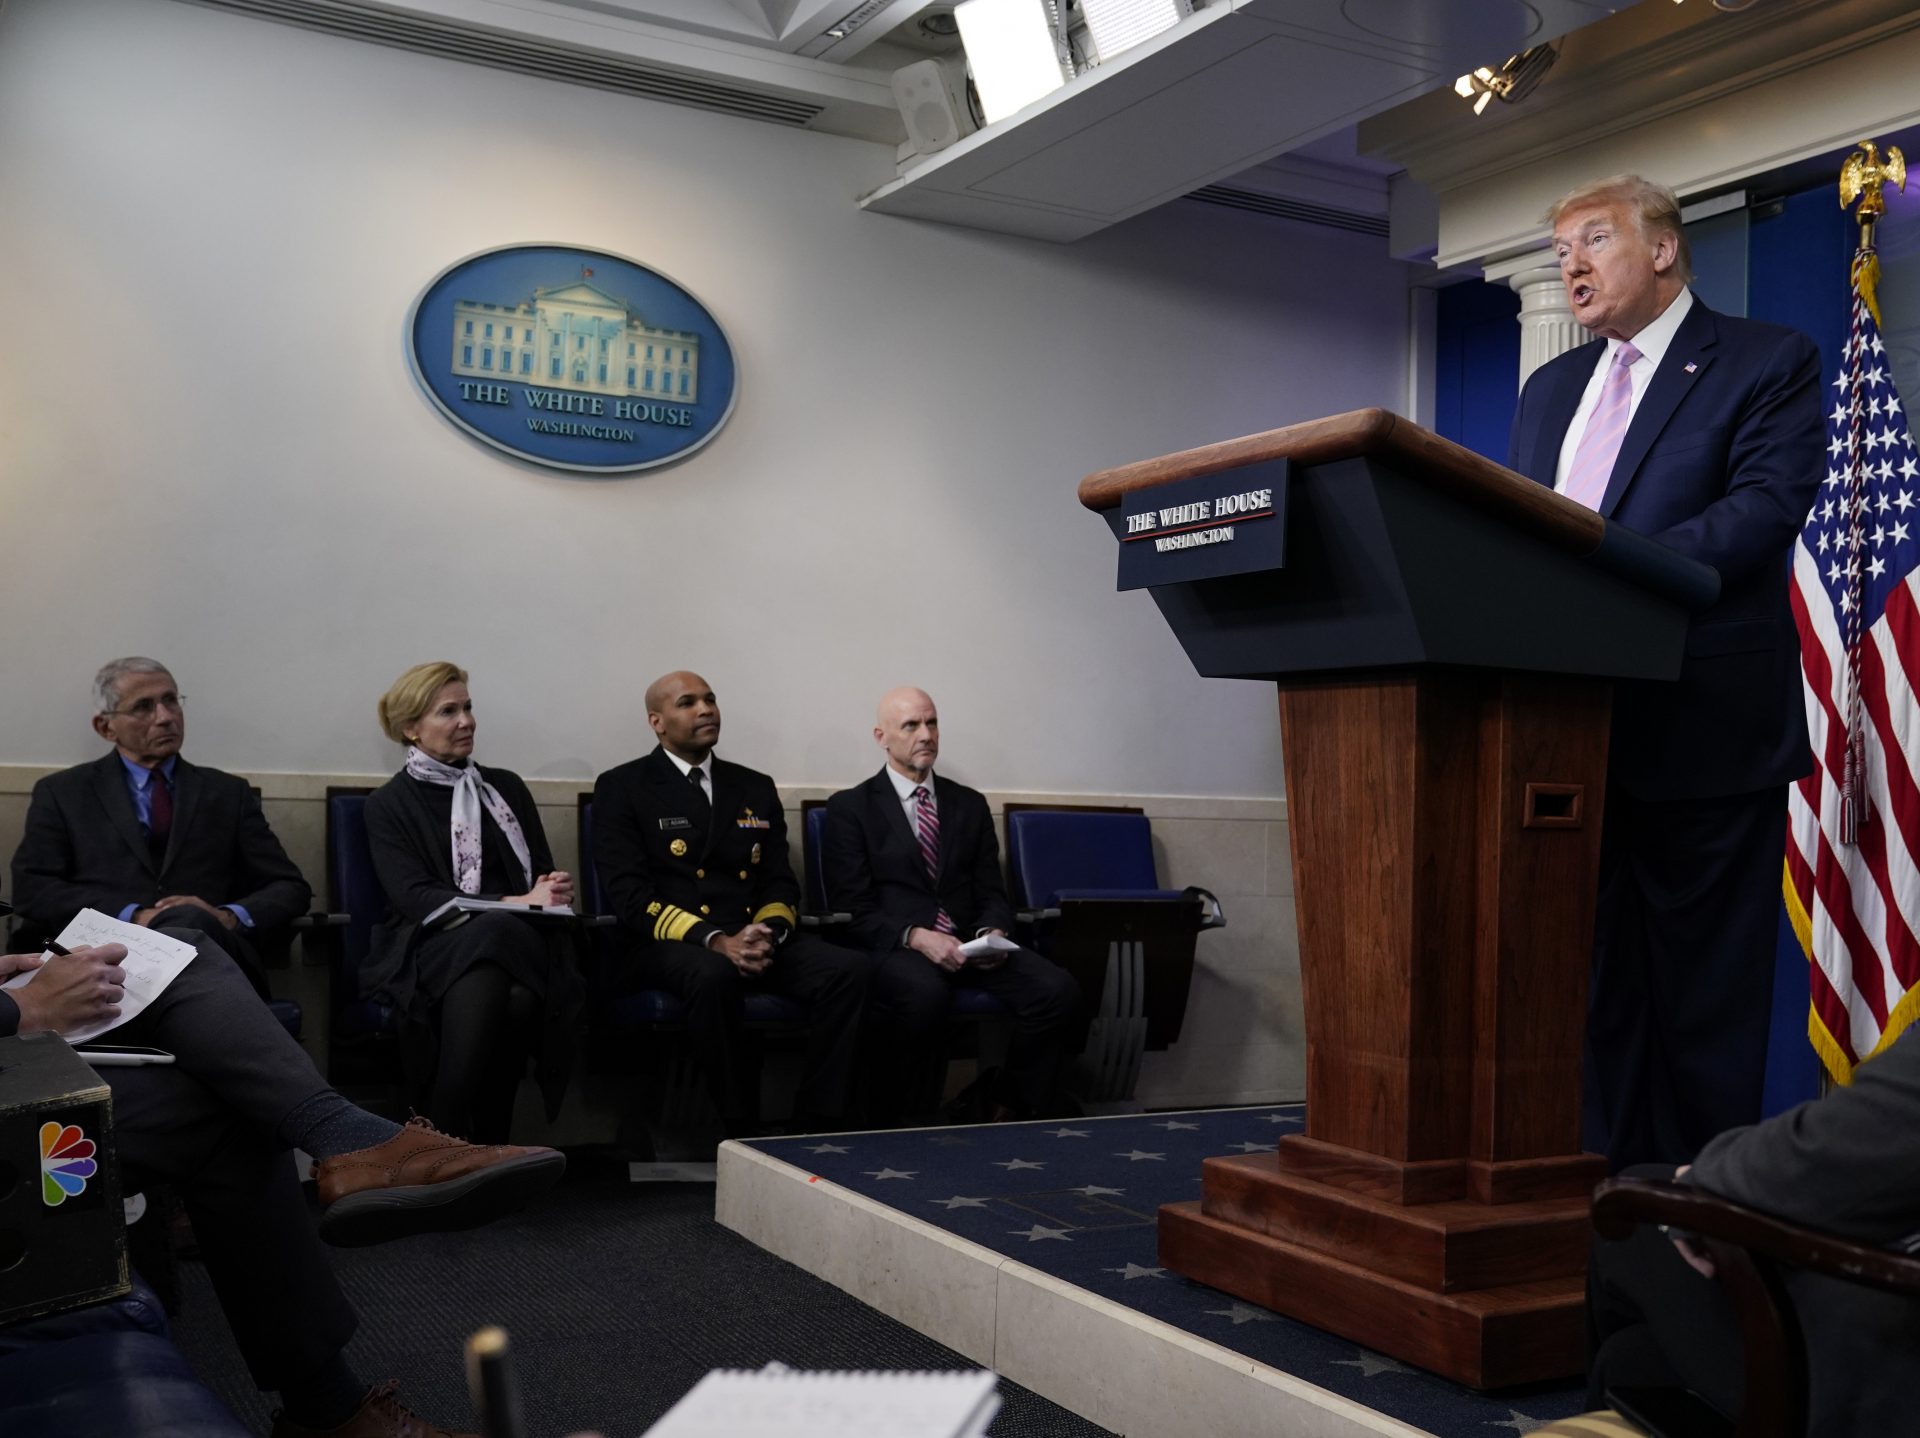 President Donald Trump speaks during a coronavirus task force briefing at the White Houseon Friday. Seated from left, Director of the National Institute of Allergy and Infectious Diseases Dr. Anthony Fauci, White House coronavirus response coordinator Dr. Deborah Birx, Surgeon General Jerome Adams, and Food and Drug Administration Commissioner Dr. Stephen Hahn.